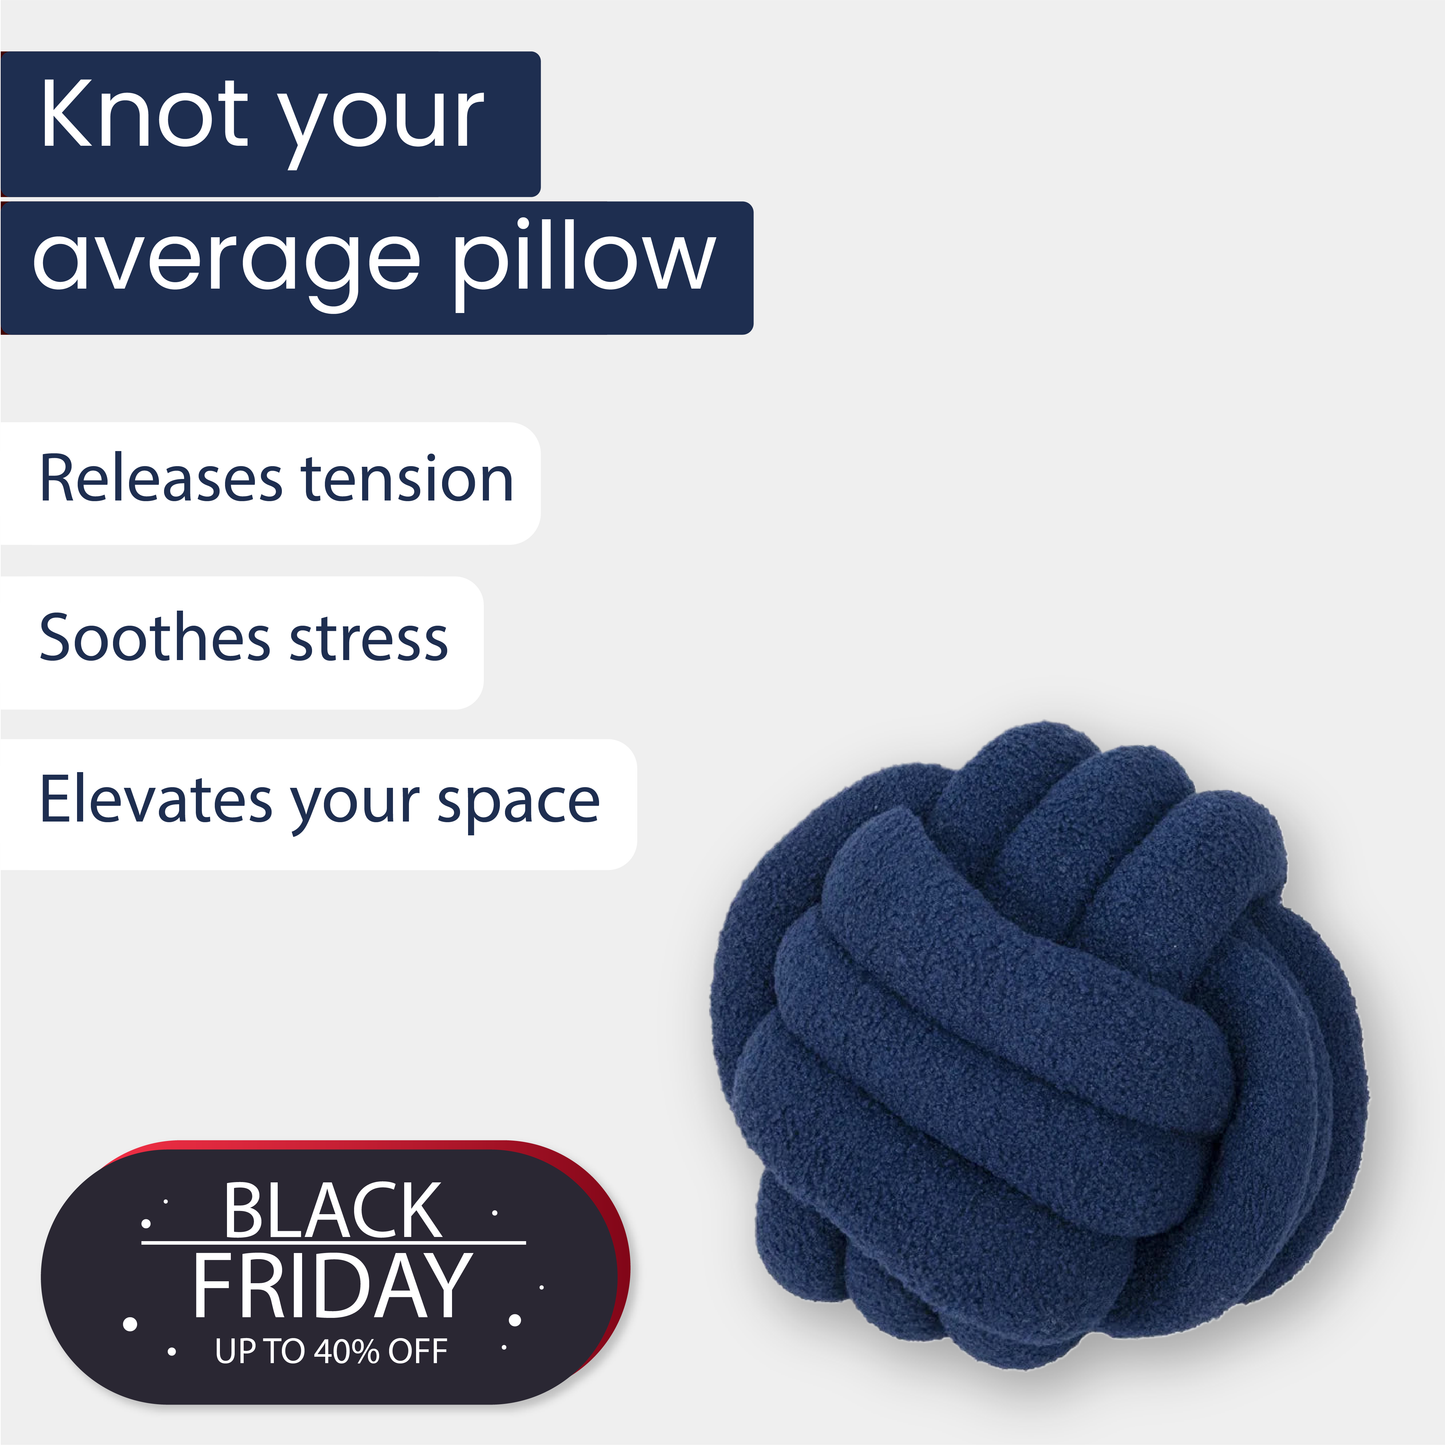 KNOTTED BALL PILLOW